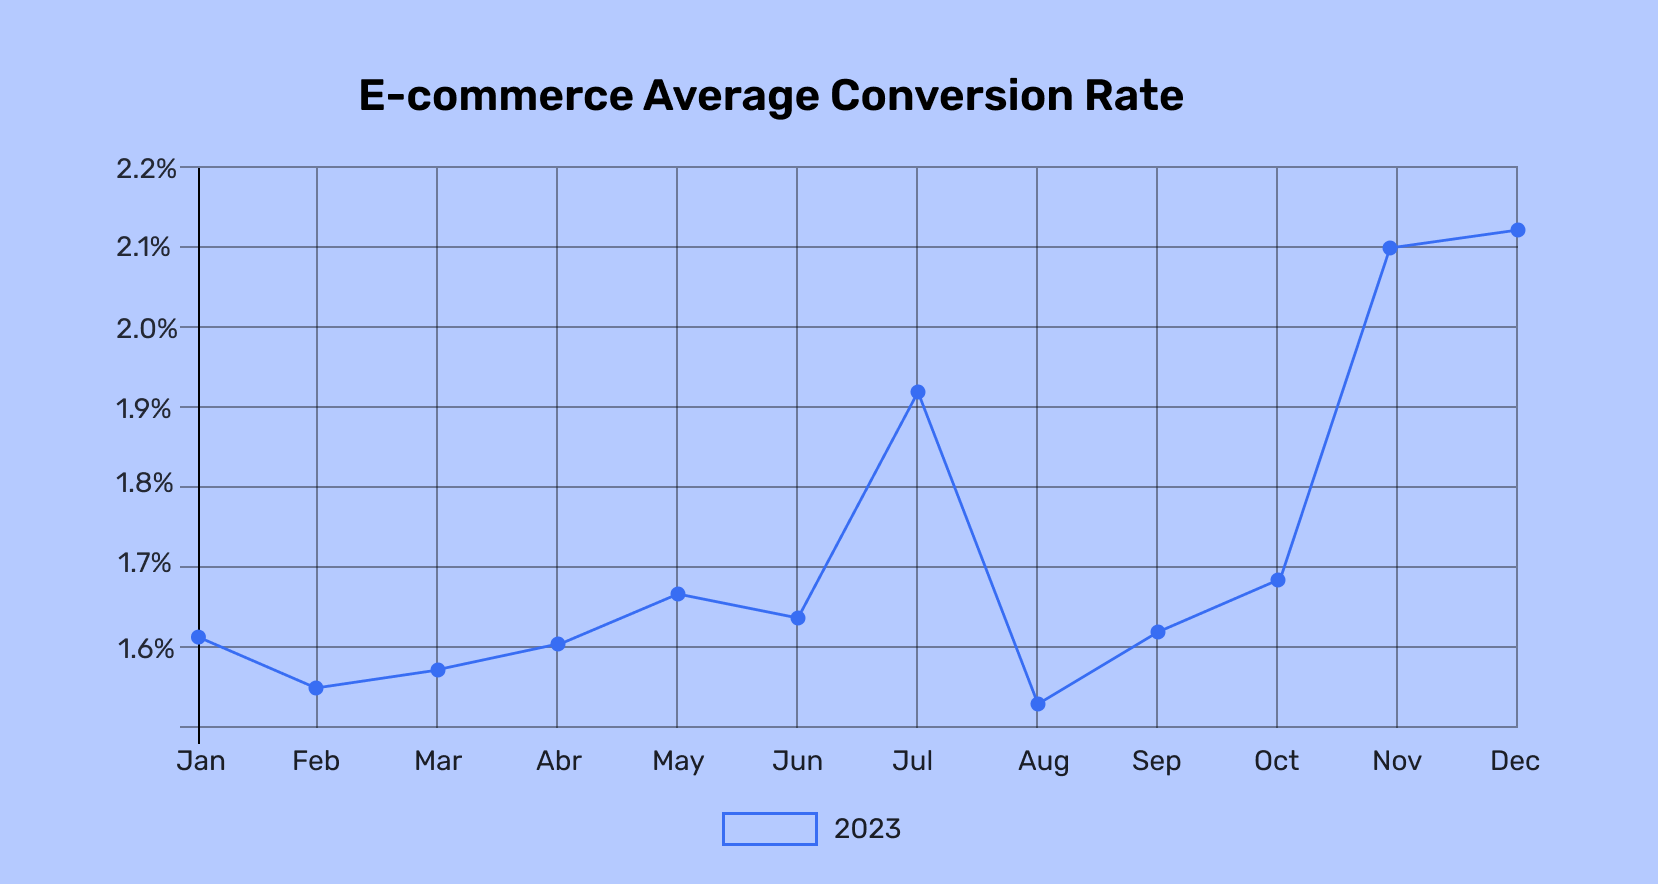 Graph showing the average Shopify conversion rate from 1.6% to 2.2% on the y-axis for the months of 2023 on the x-axis. The lowest Shopify Conversion Rates rates are in February and August below 1.6%, while the highest rates are in November and December at 2.1%